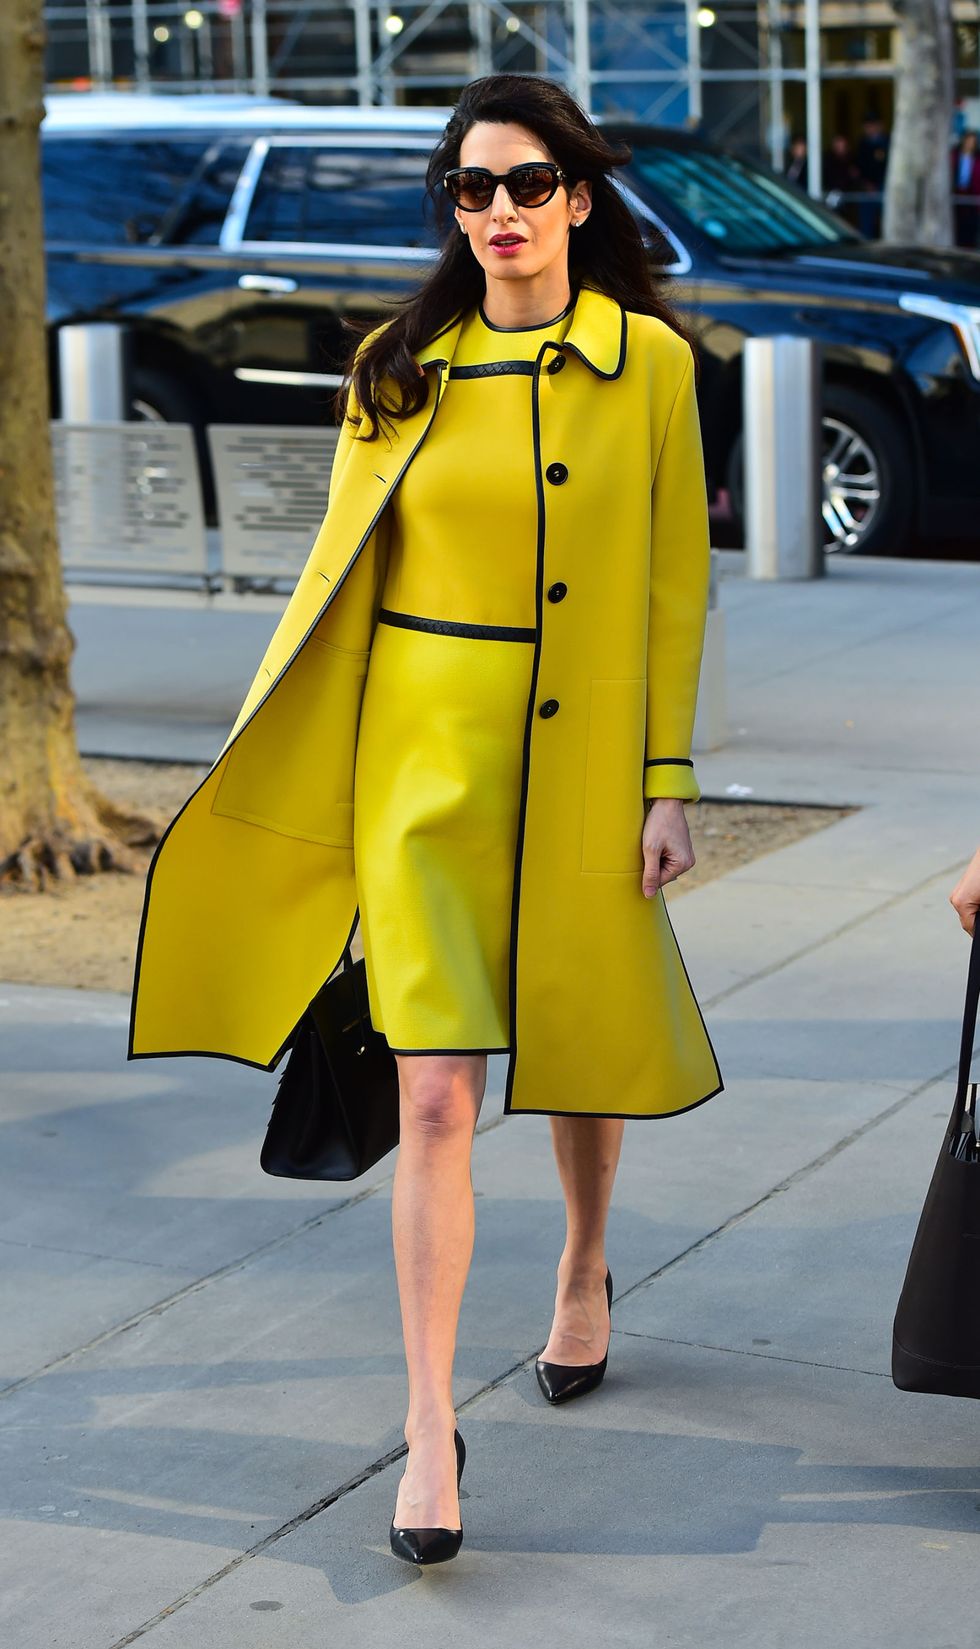 Clothing, Street fashion, Yellow, Fashion, Coat, Fashion model, Outerwear, Trench coat, Overcoat, Haute couture, 